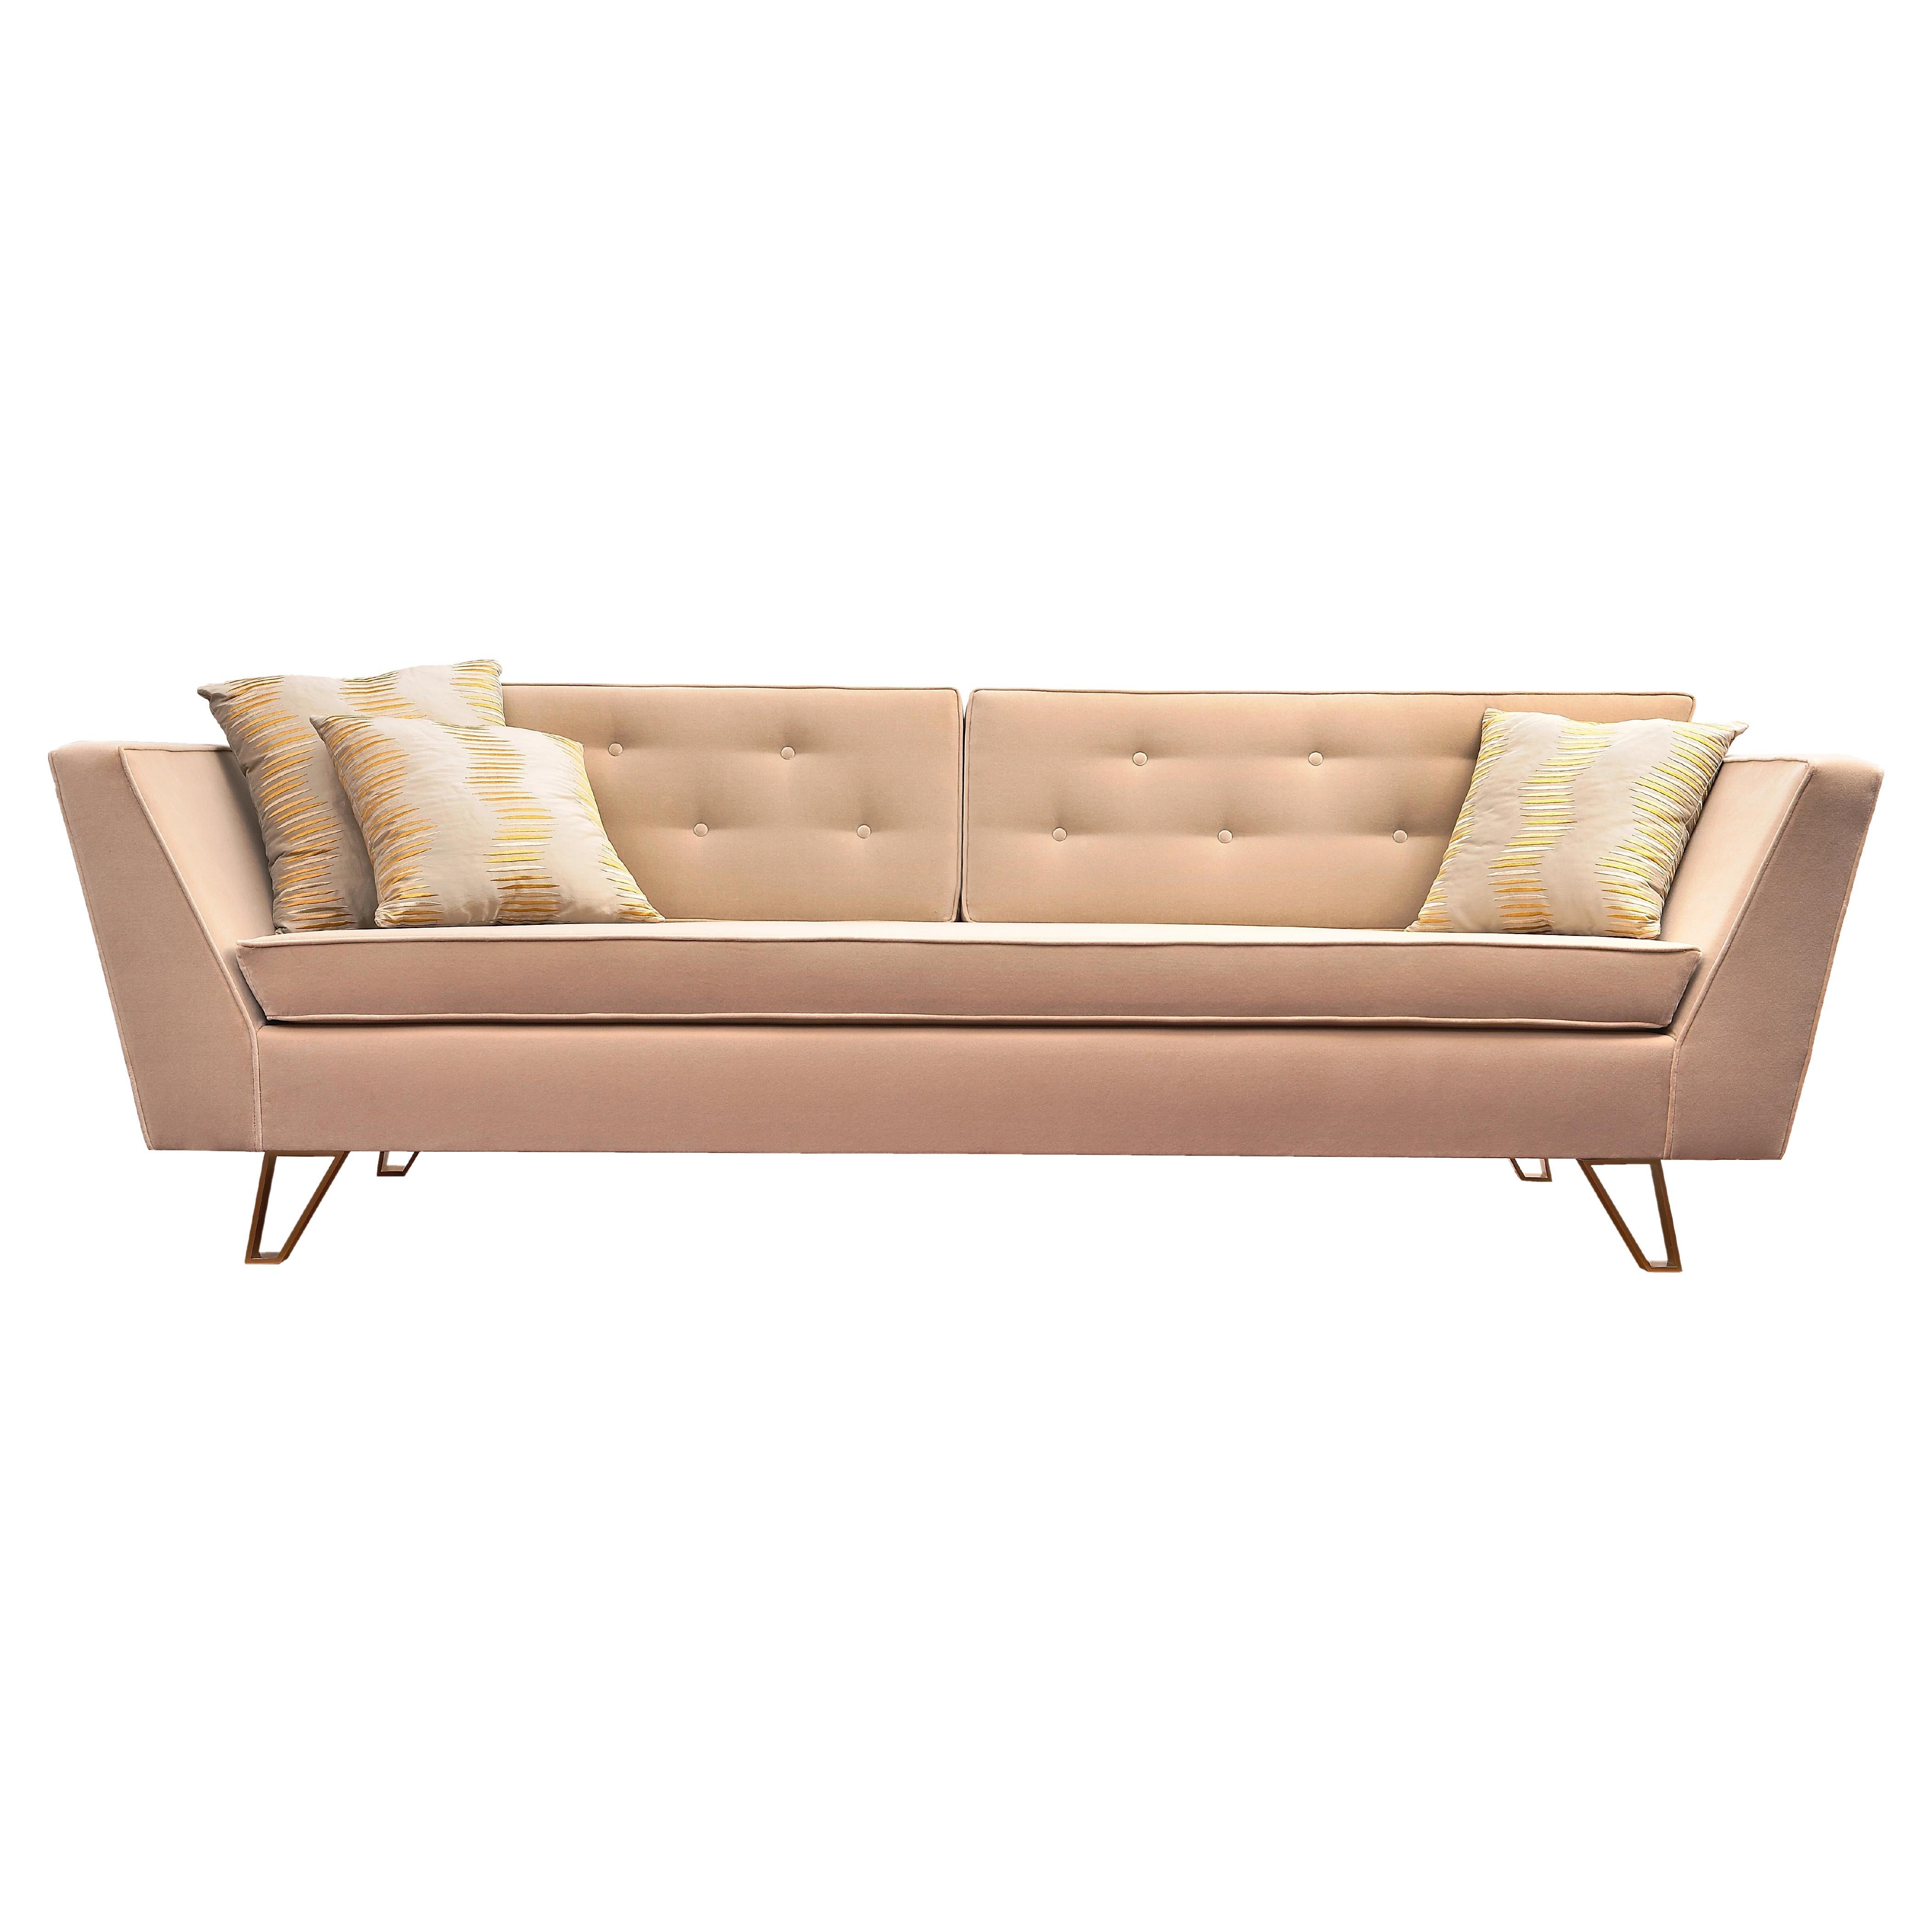 Contemporary Handmade Sofa "Arktos" Inclined Arm Rests and Brass Legs by Anaktae For Sale